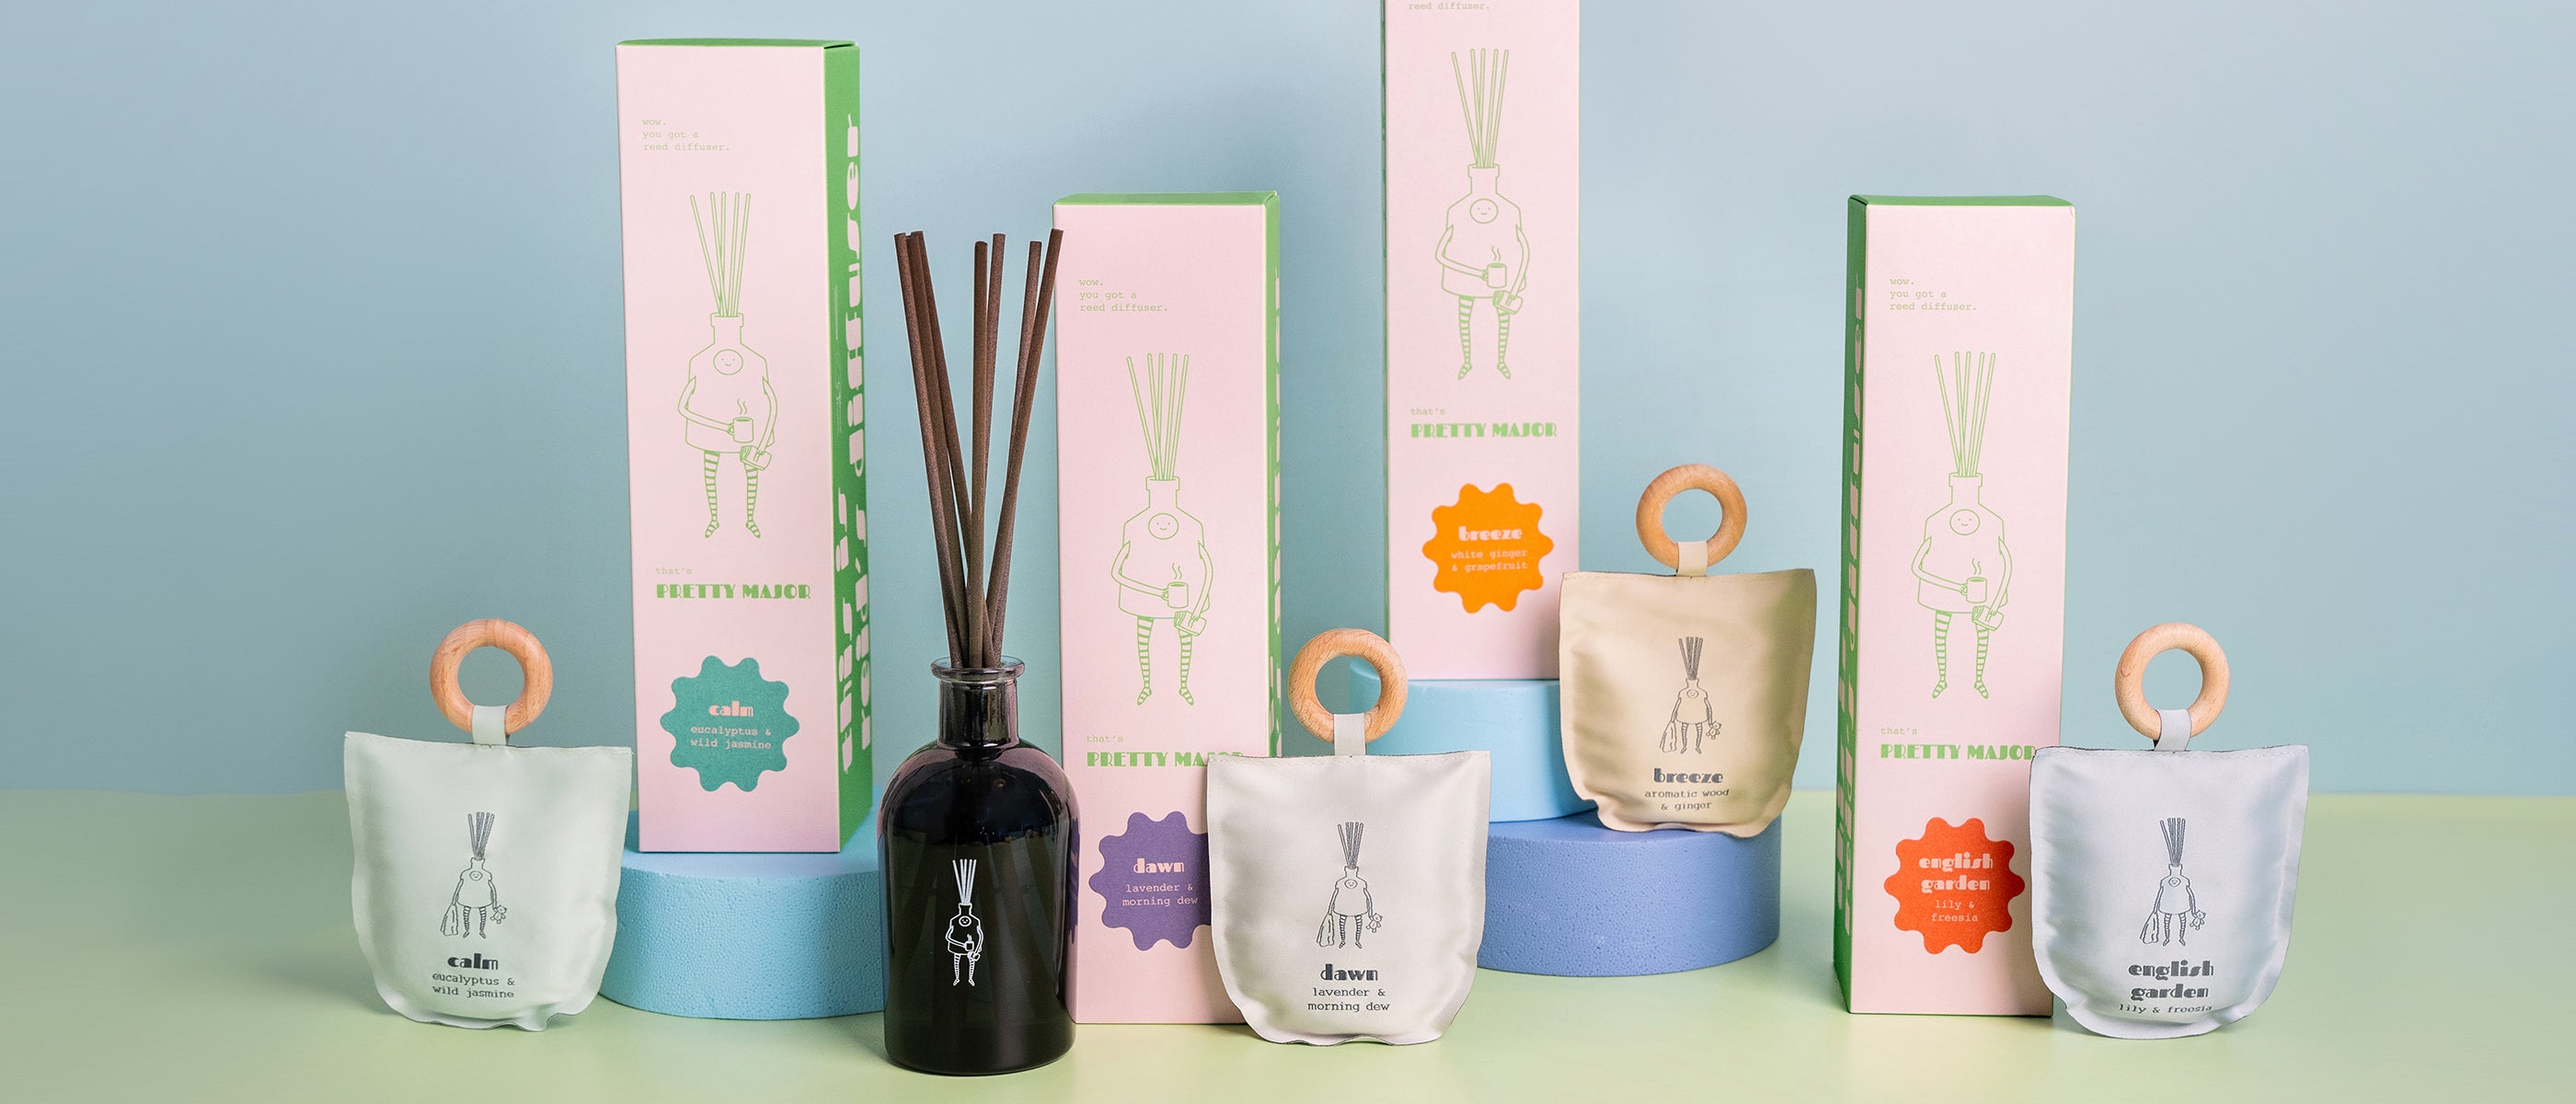 pretty major home fragrance scent reed diffuser and scented sachet